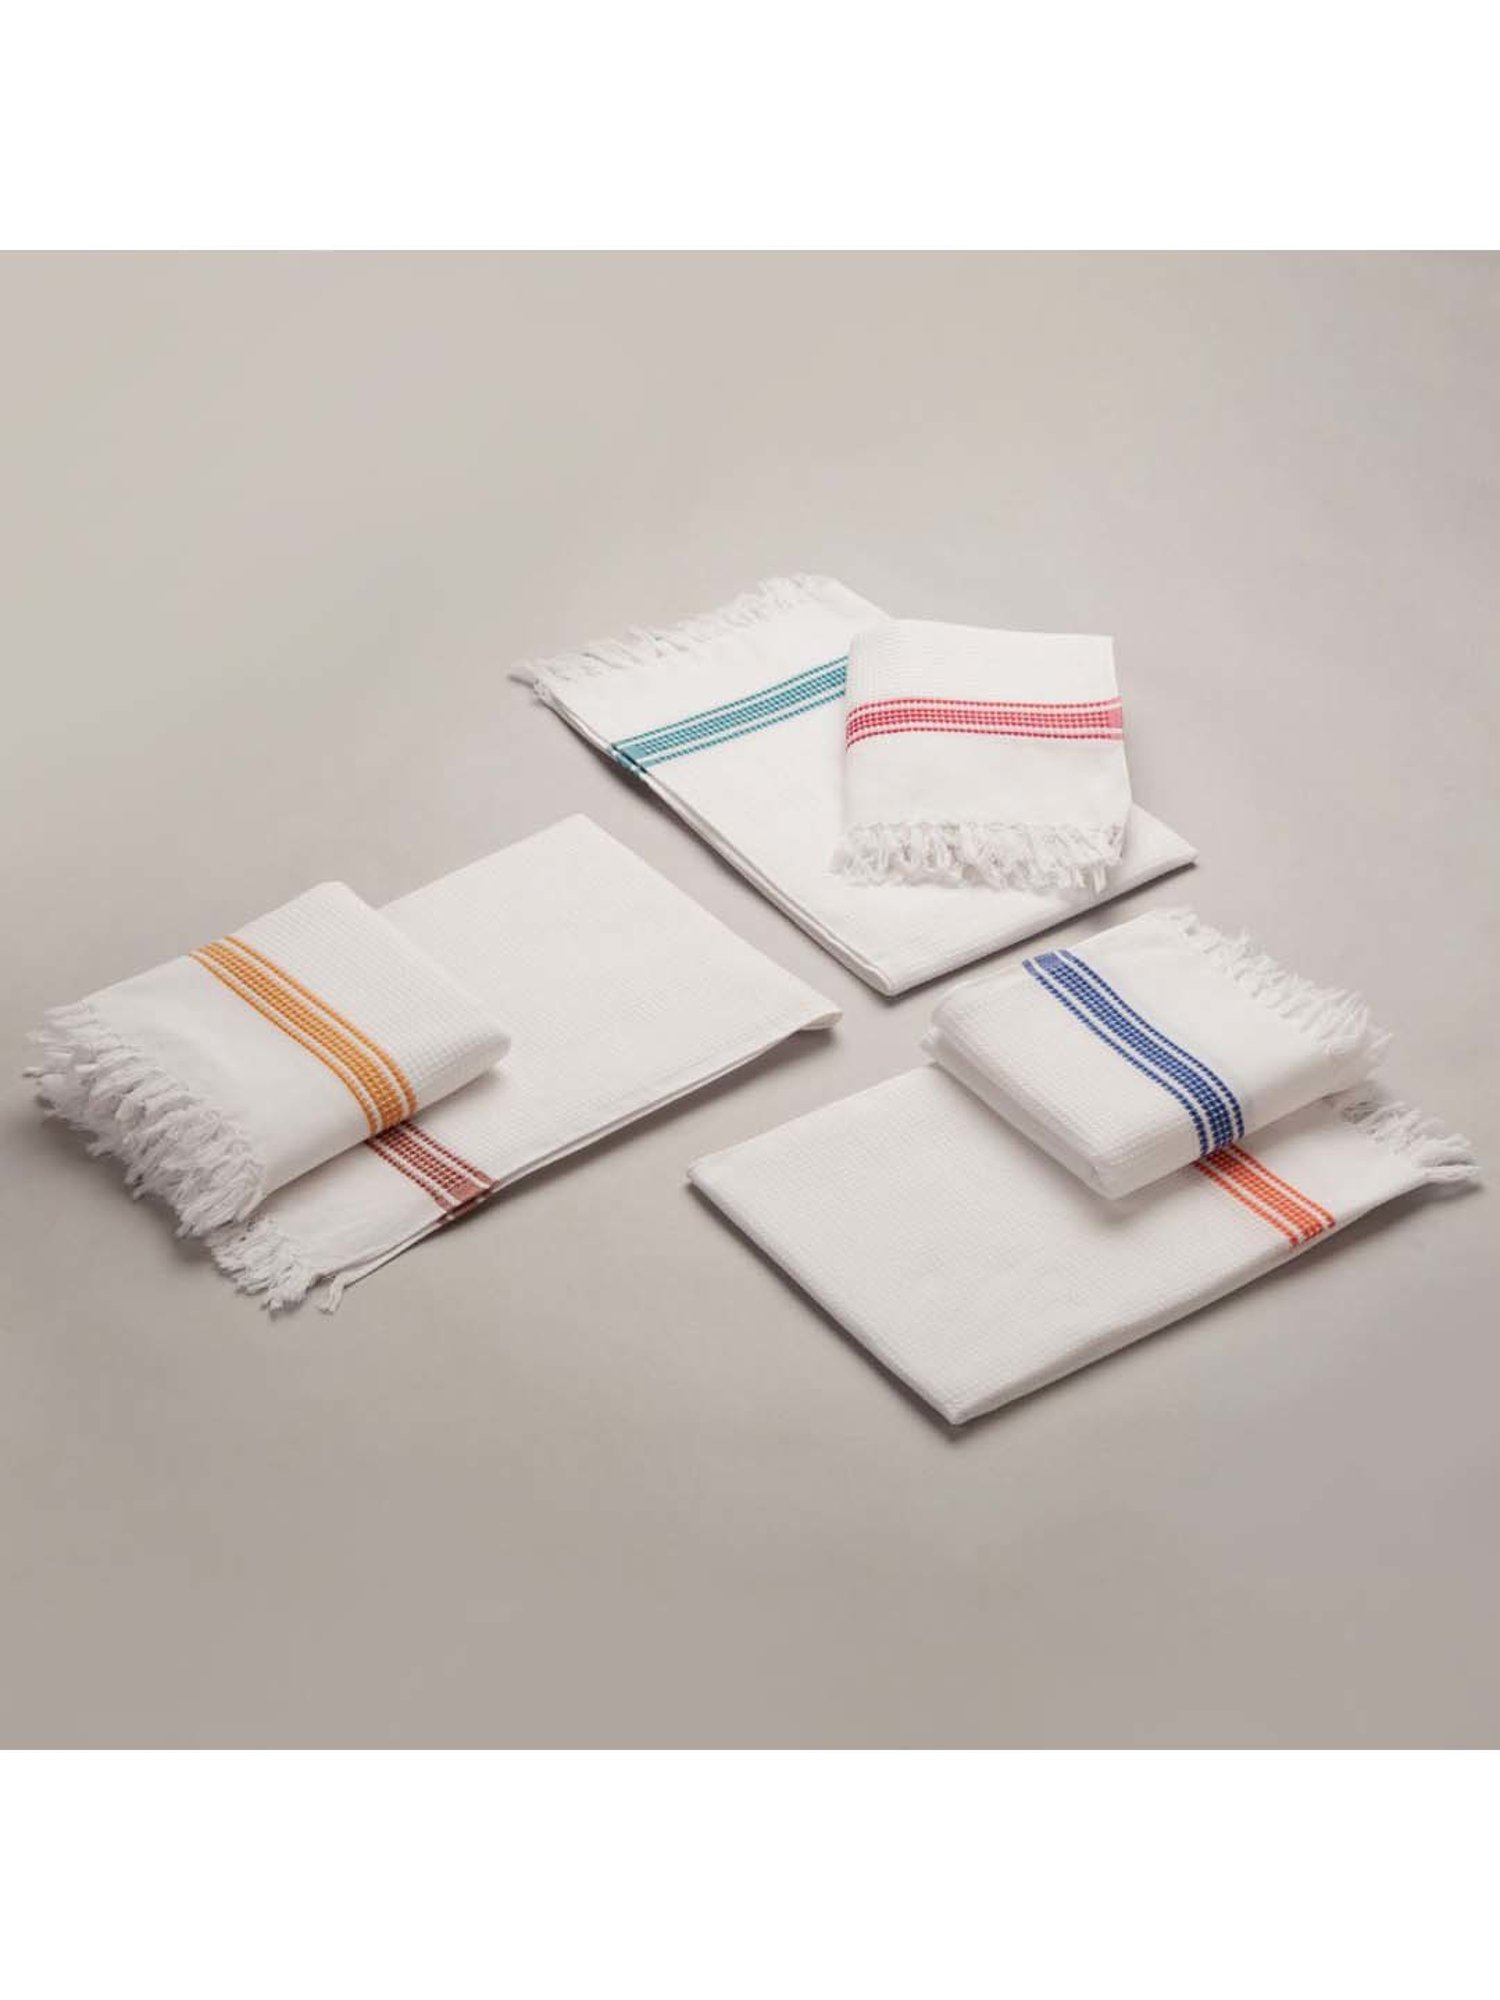 Welspun Towels in Ahmedabad - Dealers, Manufacturers & Suppliers - Justdial